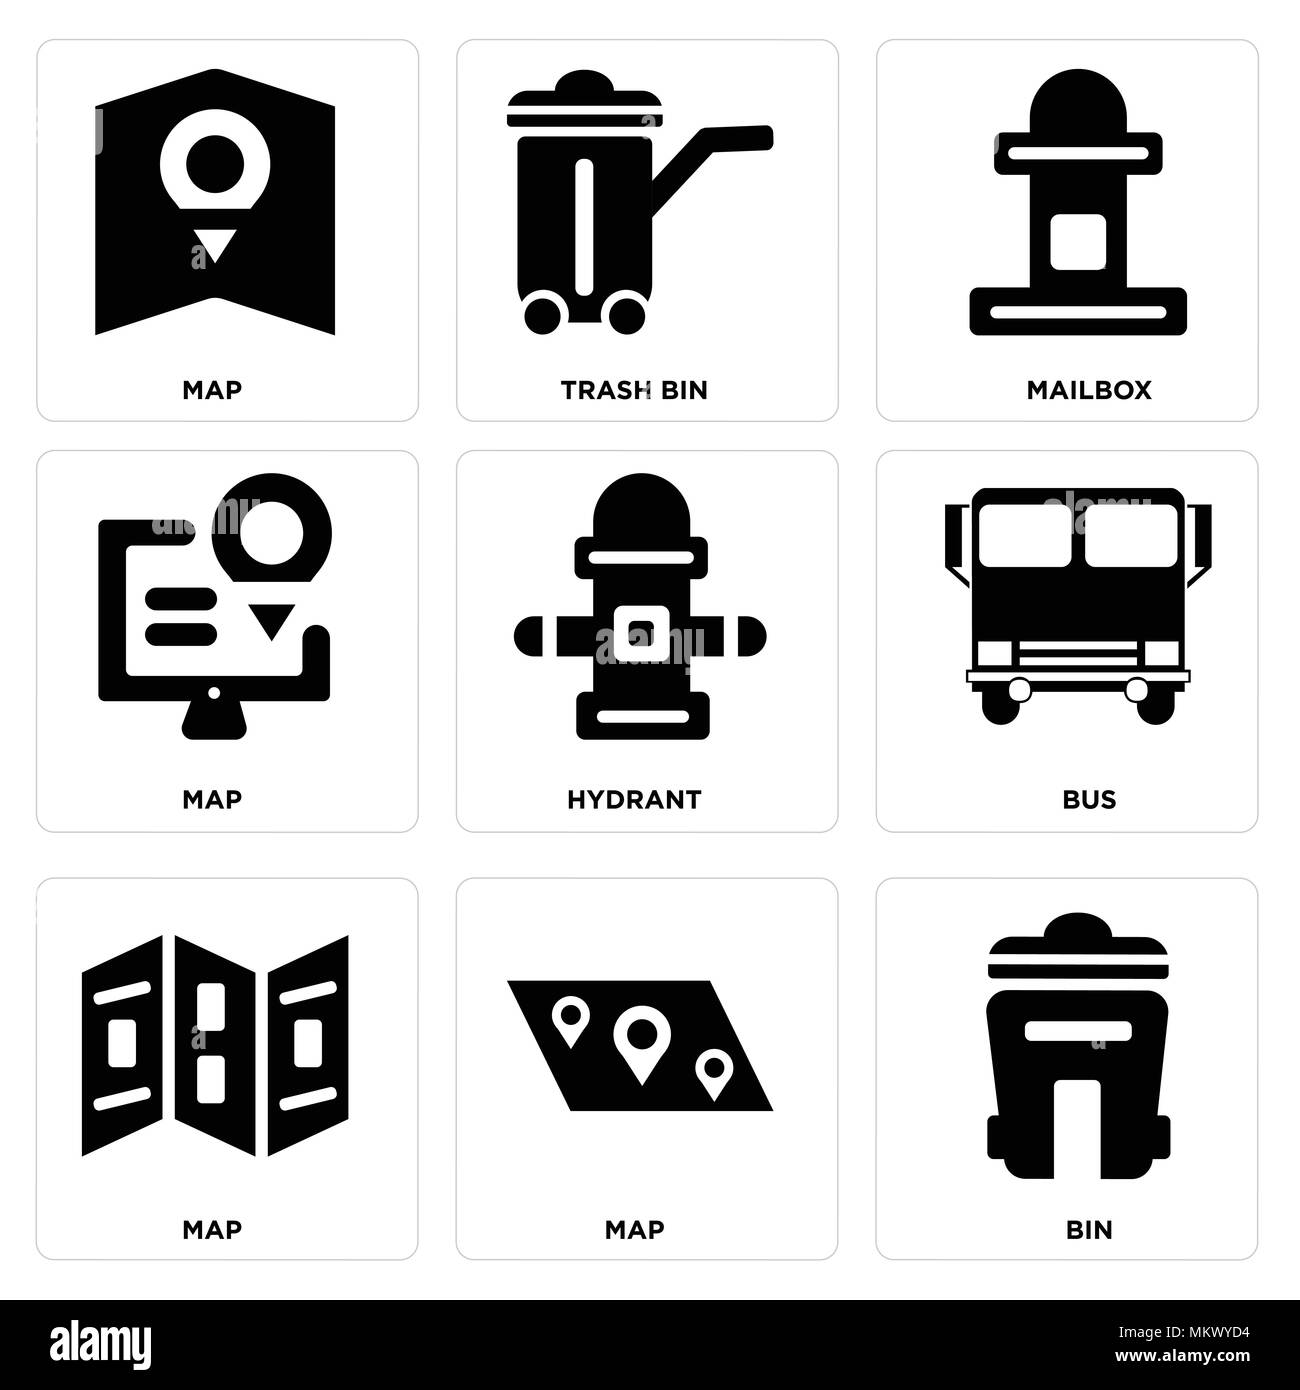 https://c8.alamy.com/comp/MKWYD4/set-of-9-simple-editable-icons-such-as-bin-map-bus-hydrant-mailbox-trash-bin-can-be-used-for-mobile-web-MKWYD4.jpg